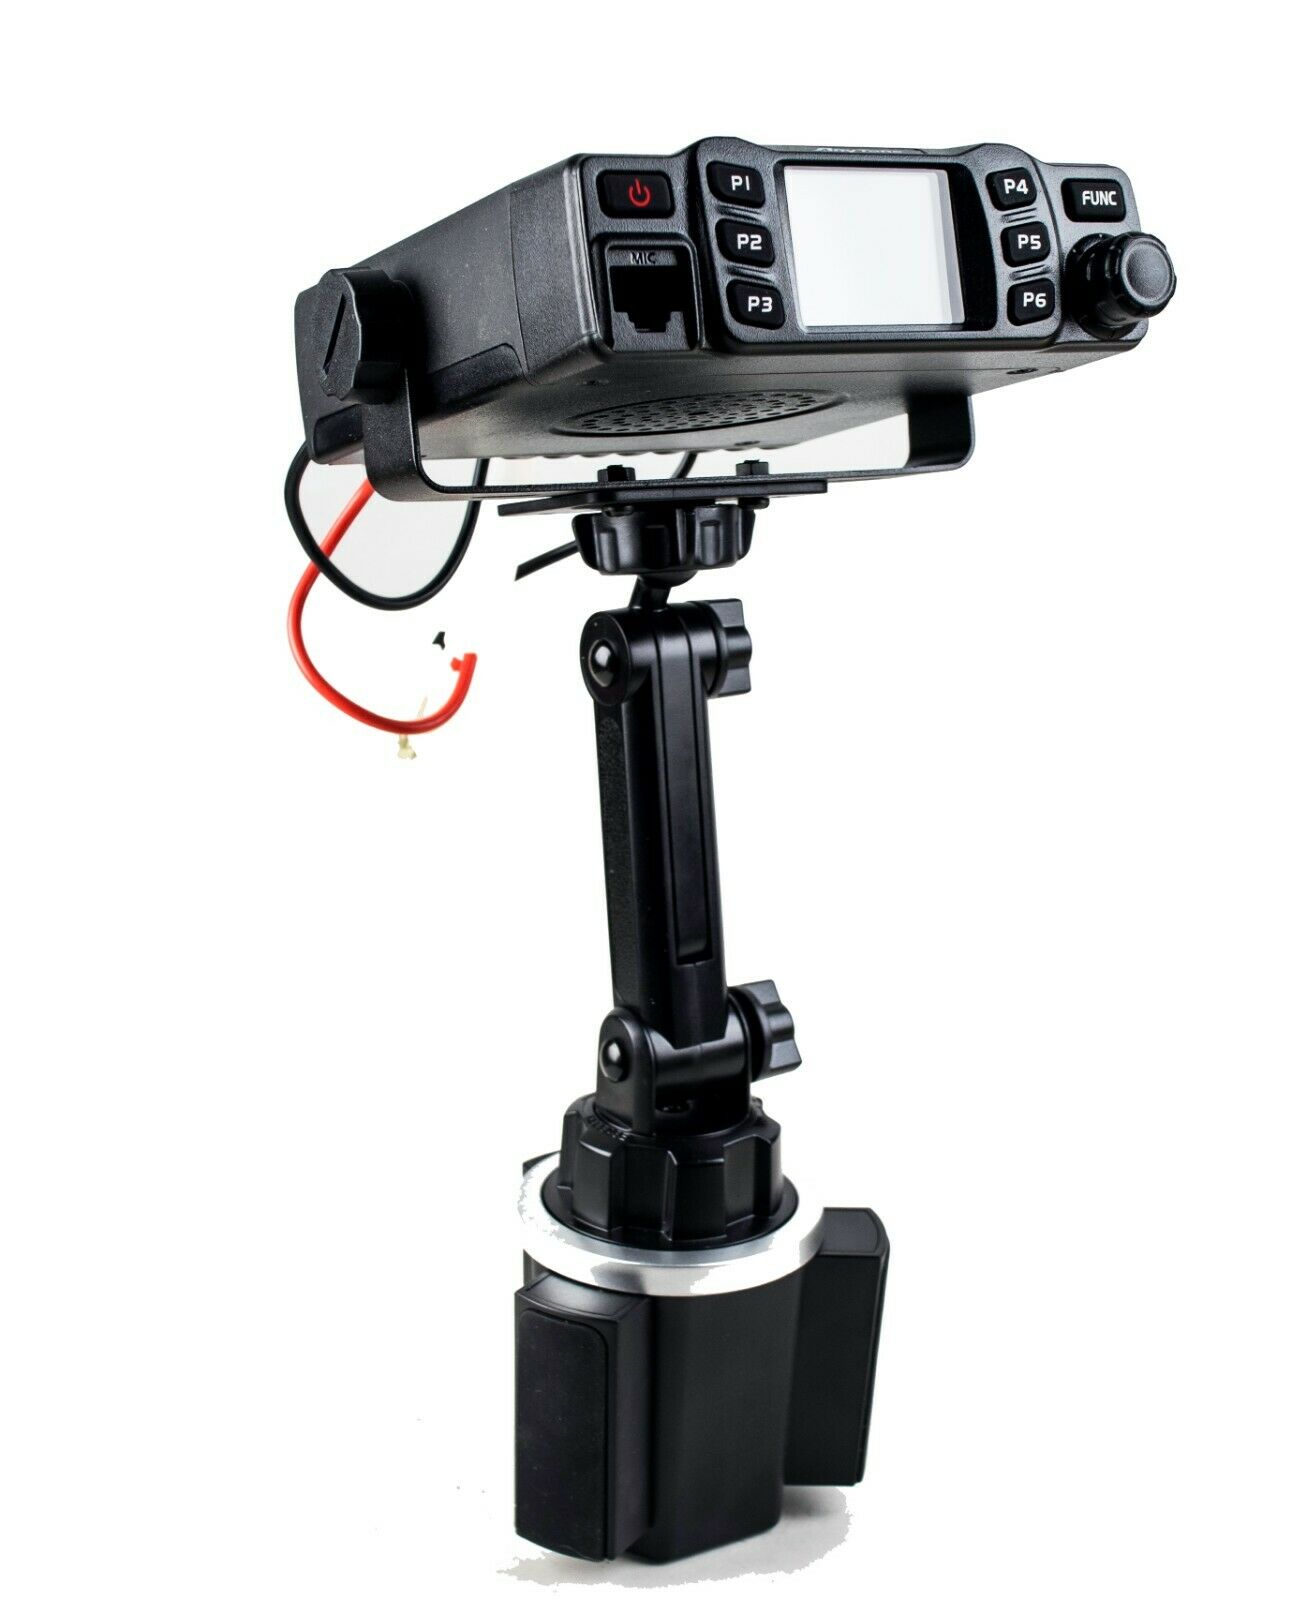 New Cup Holder Mount With Variable Height With Mic Holder For Anytone At-778uv